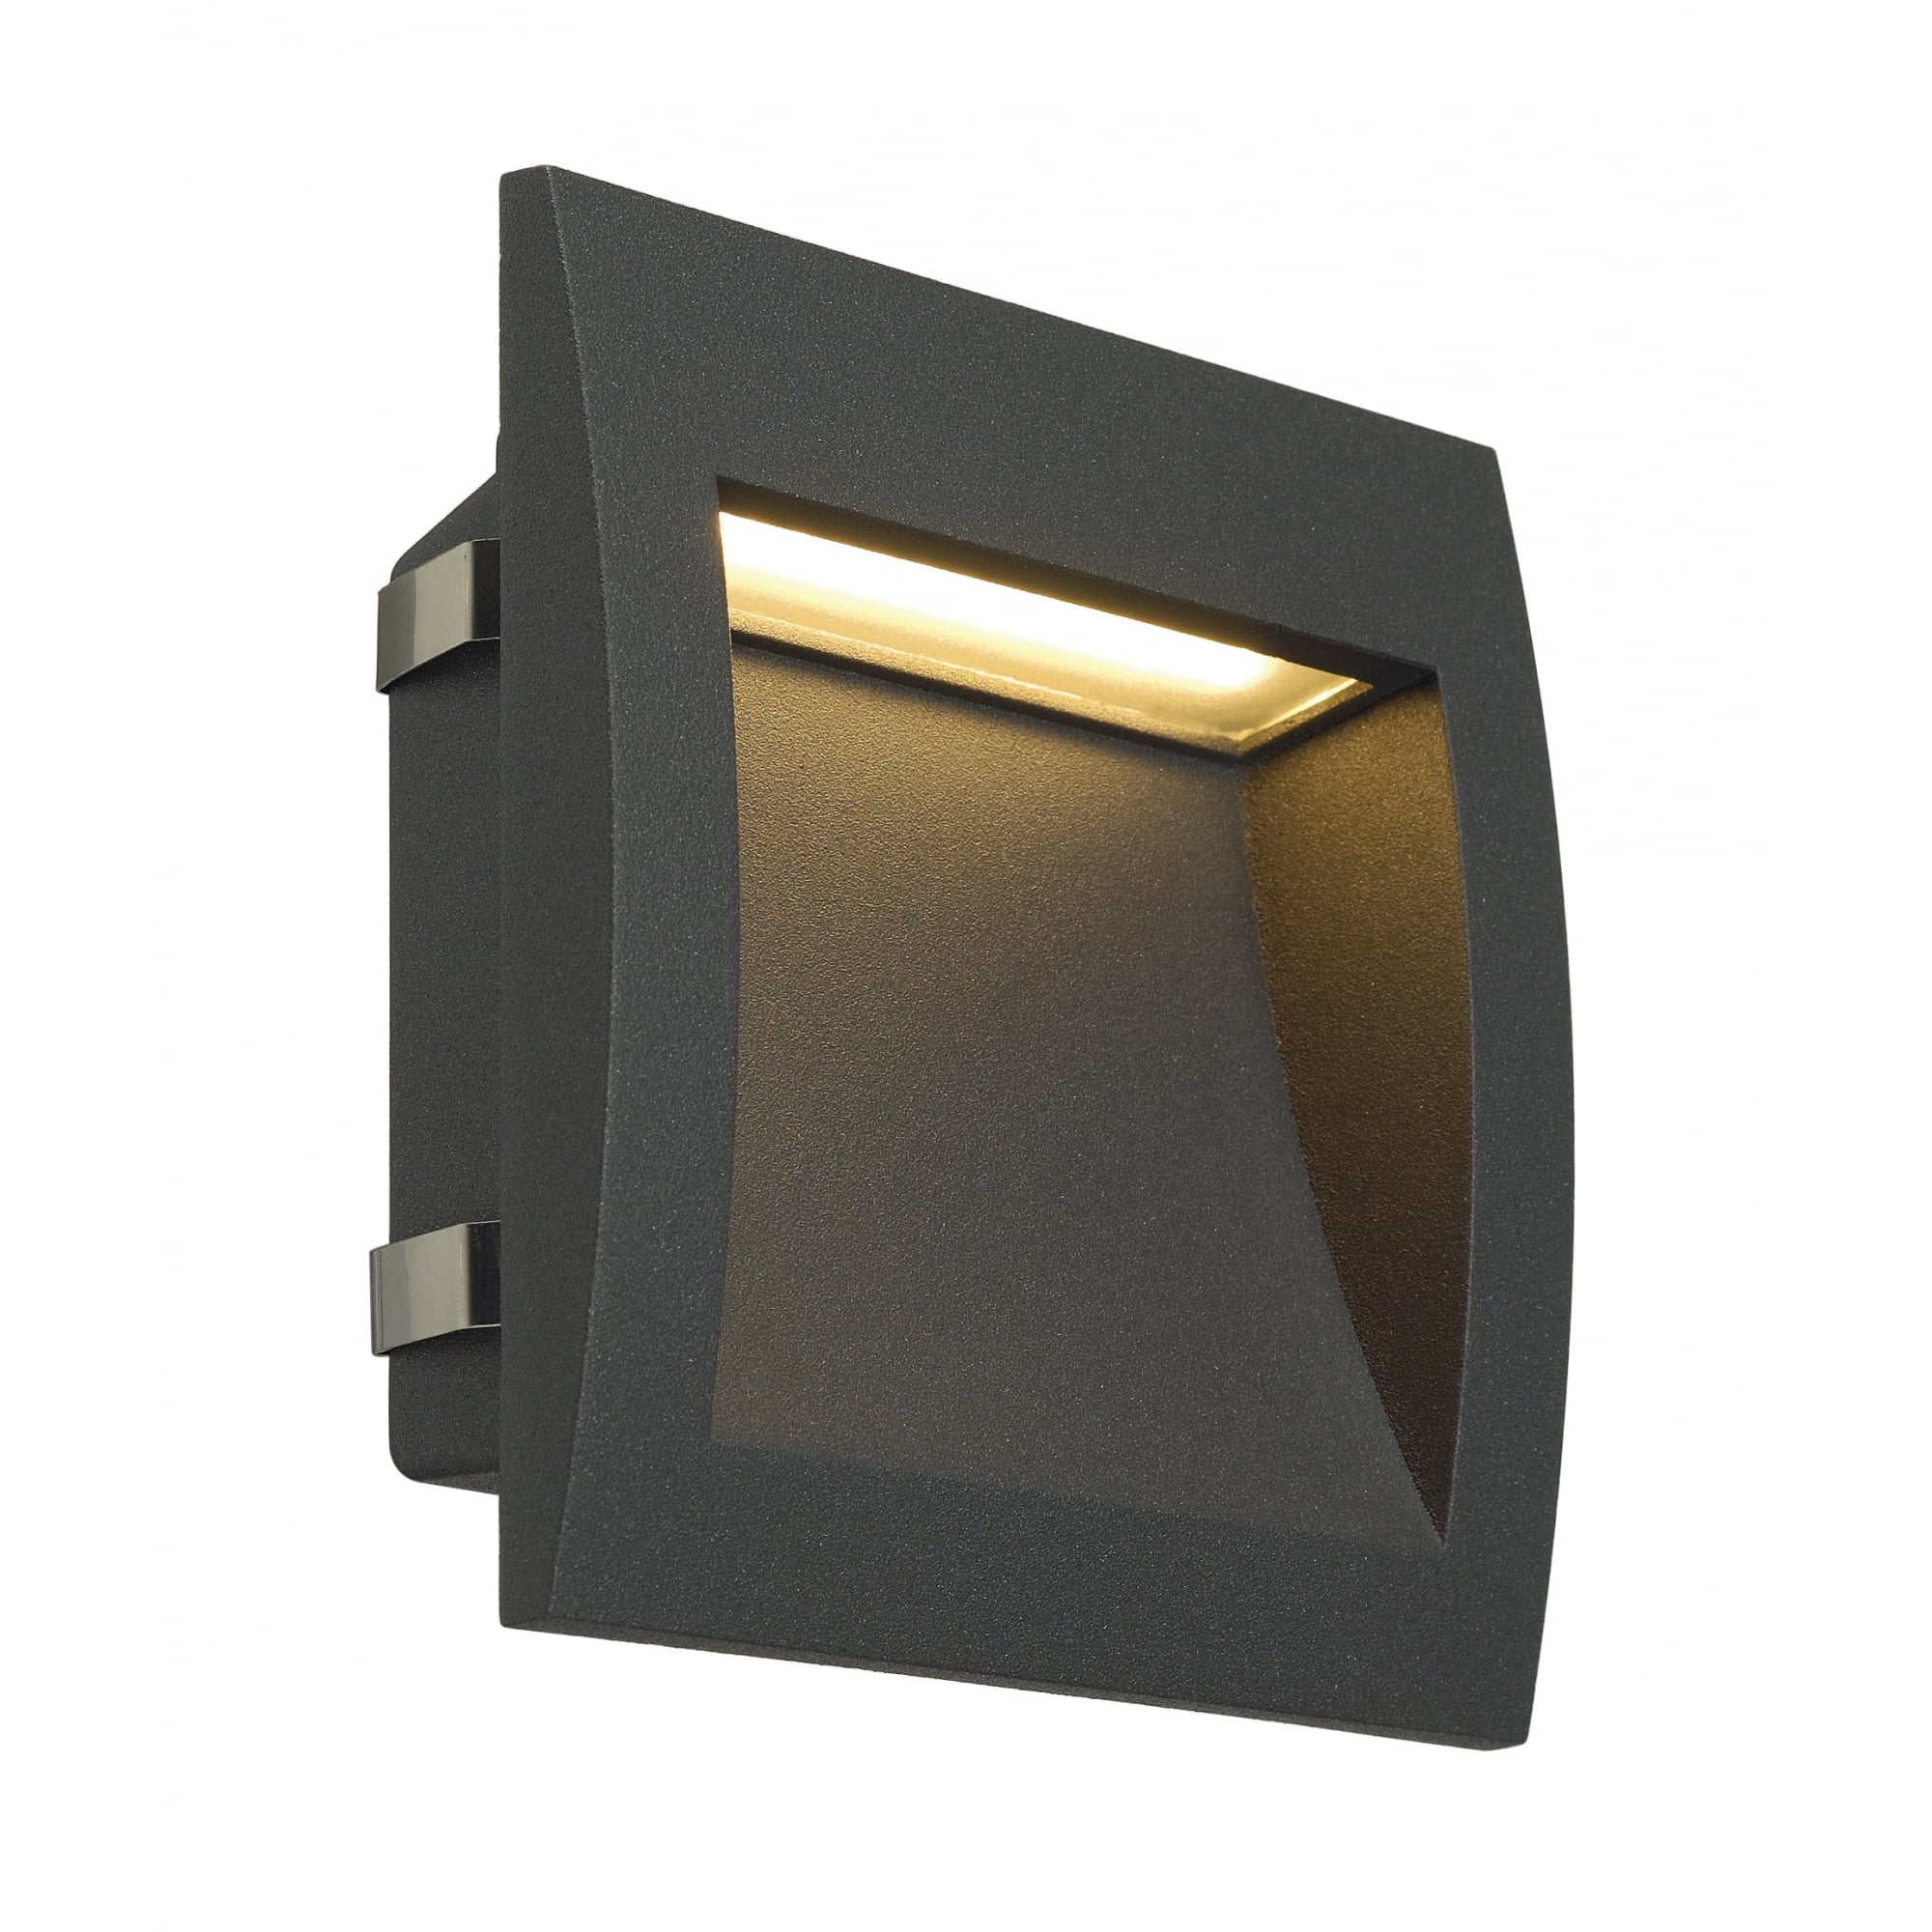 Downunder Square (L) Recessed LED Anthracite Wall Light, 3K, IP55